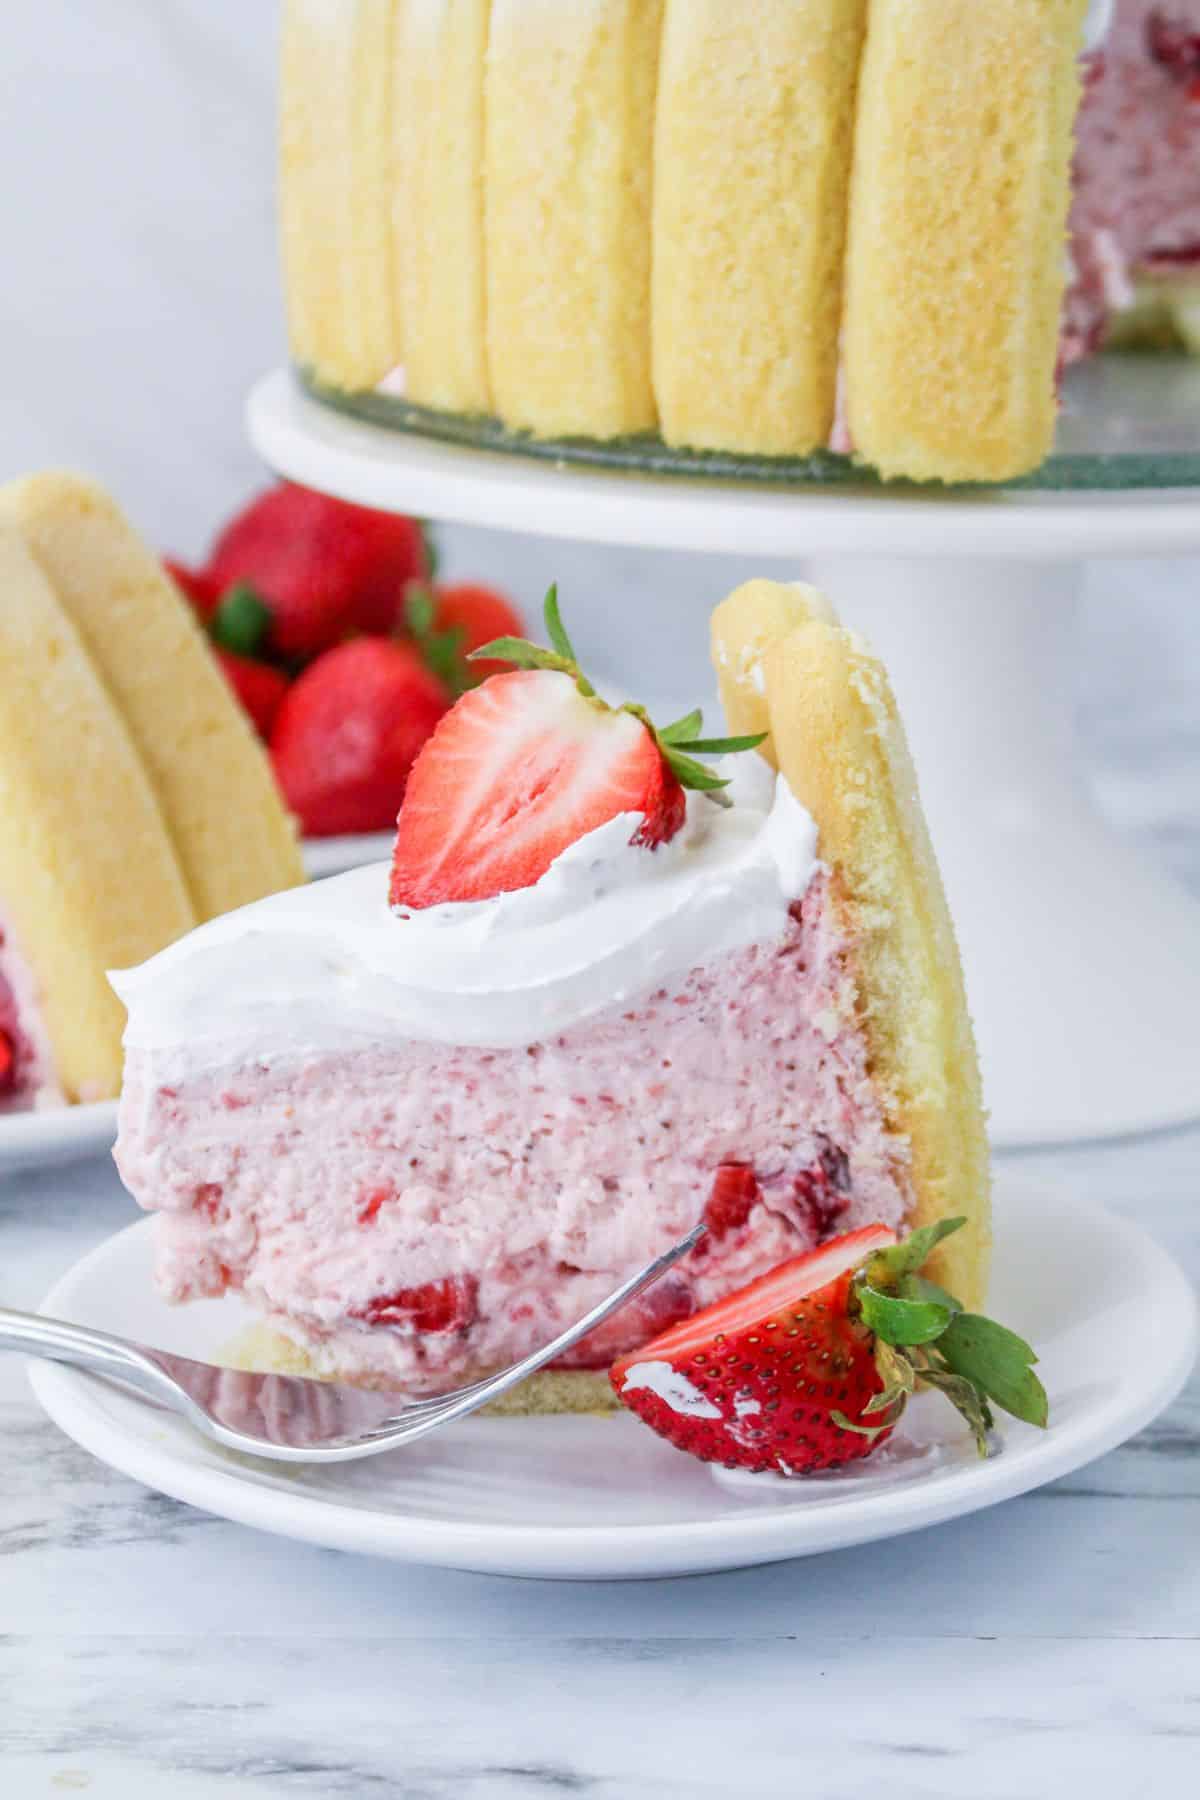 slice of strawberry charlotte cake on a white plate with a strawberry half